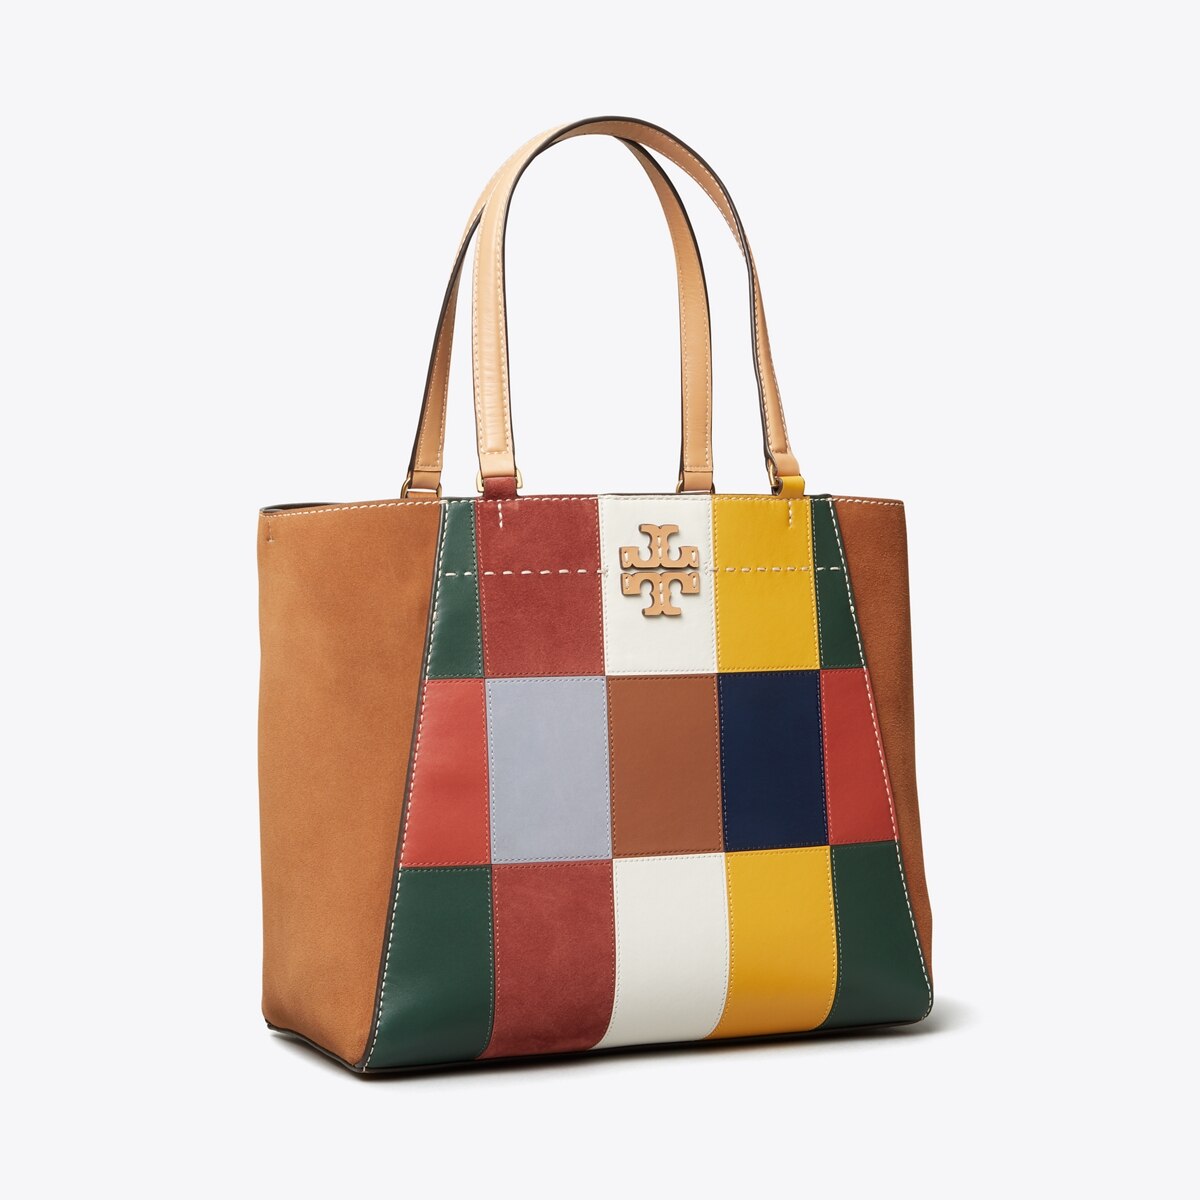 McGraw Patchwork Carryall: Women's Designer Tote Bags | Tory Burch